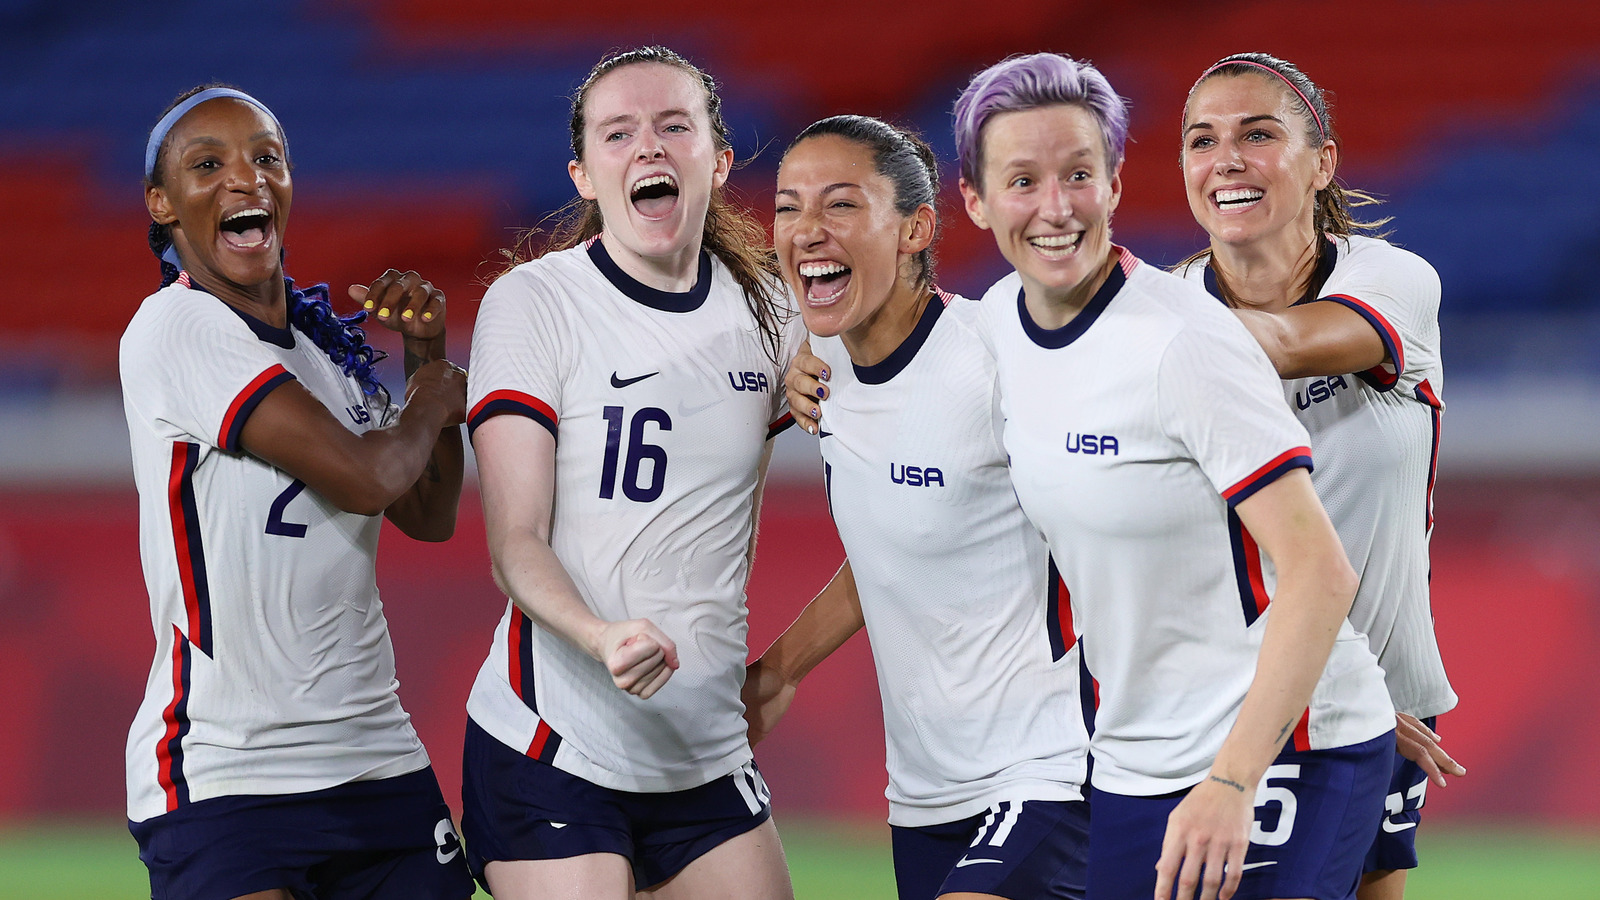 Tragic Details About The US Women's Soccer Team